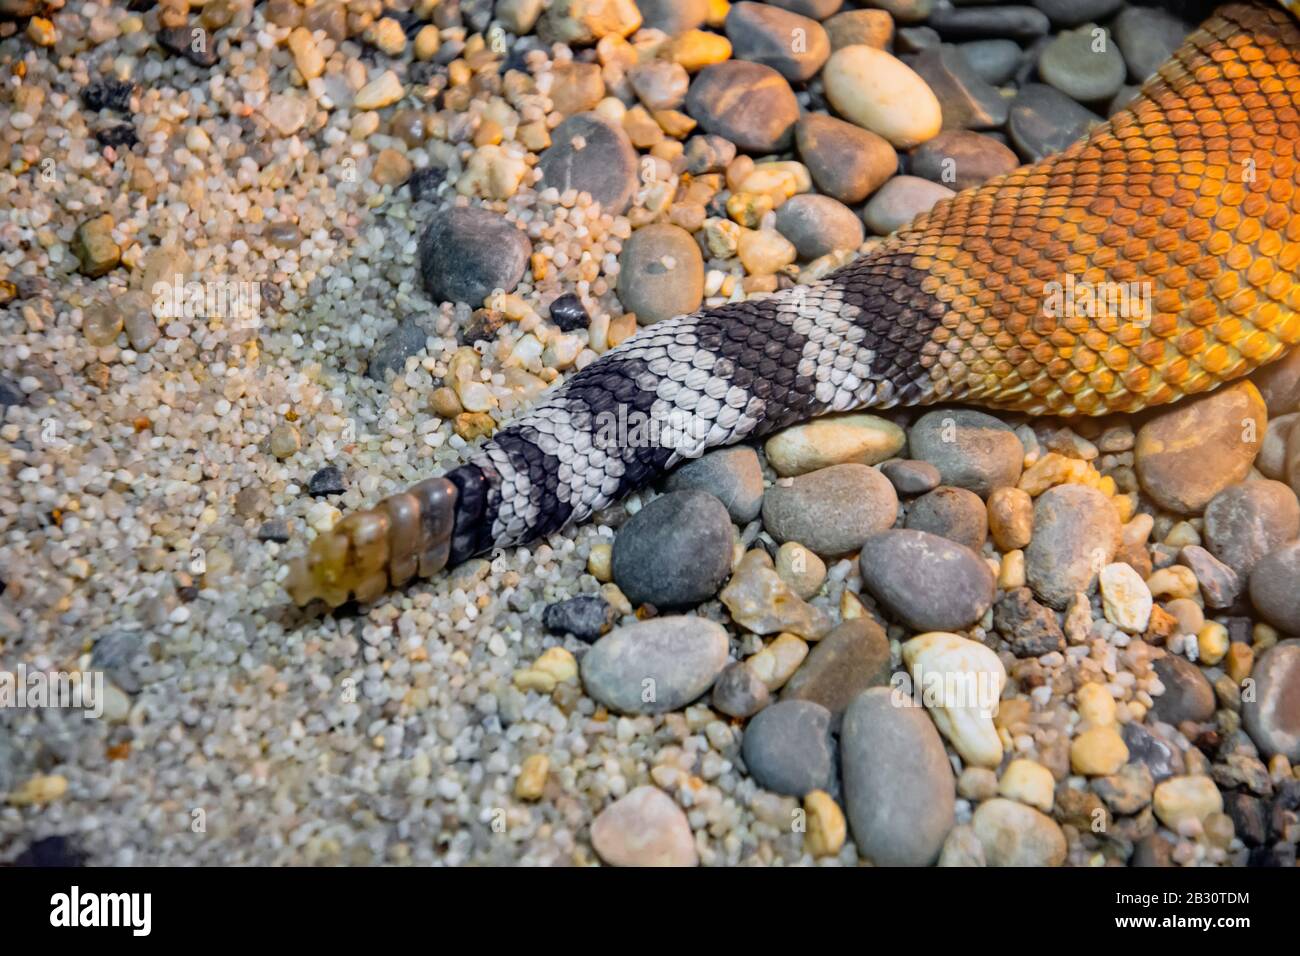 Rattlesnake tail close up view on sand and stones Stock Photo